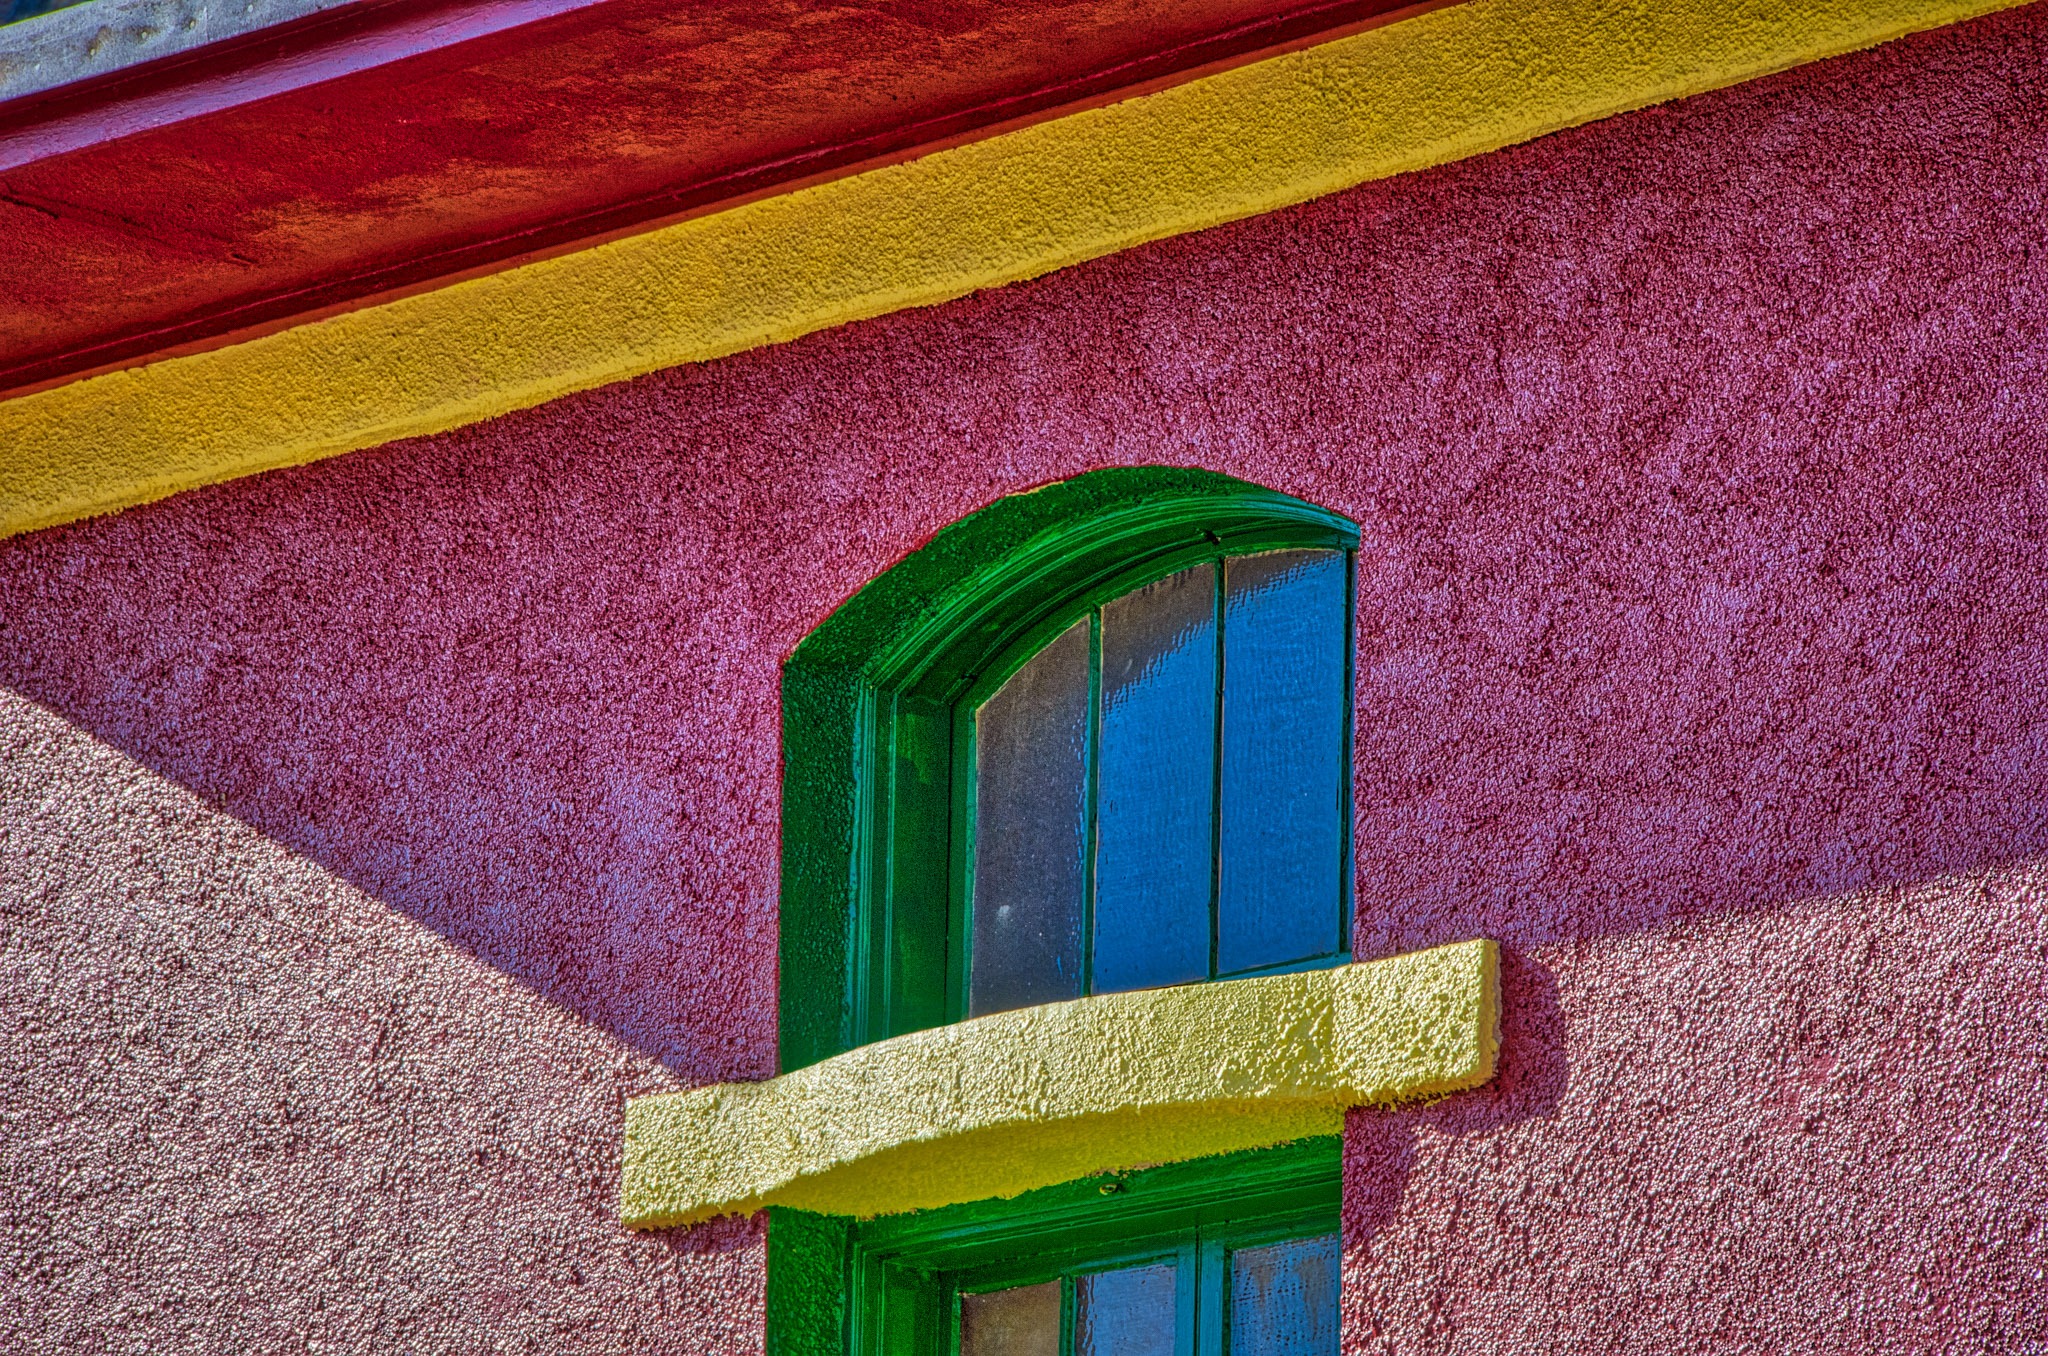 This is a cloeup view of some details on a newly refurbished stucco building on Tombstone Canyon Road in Bisbee, Arizona.